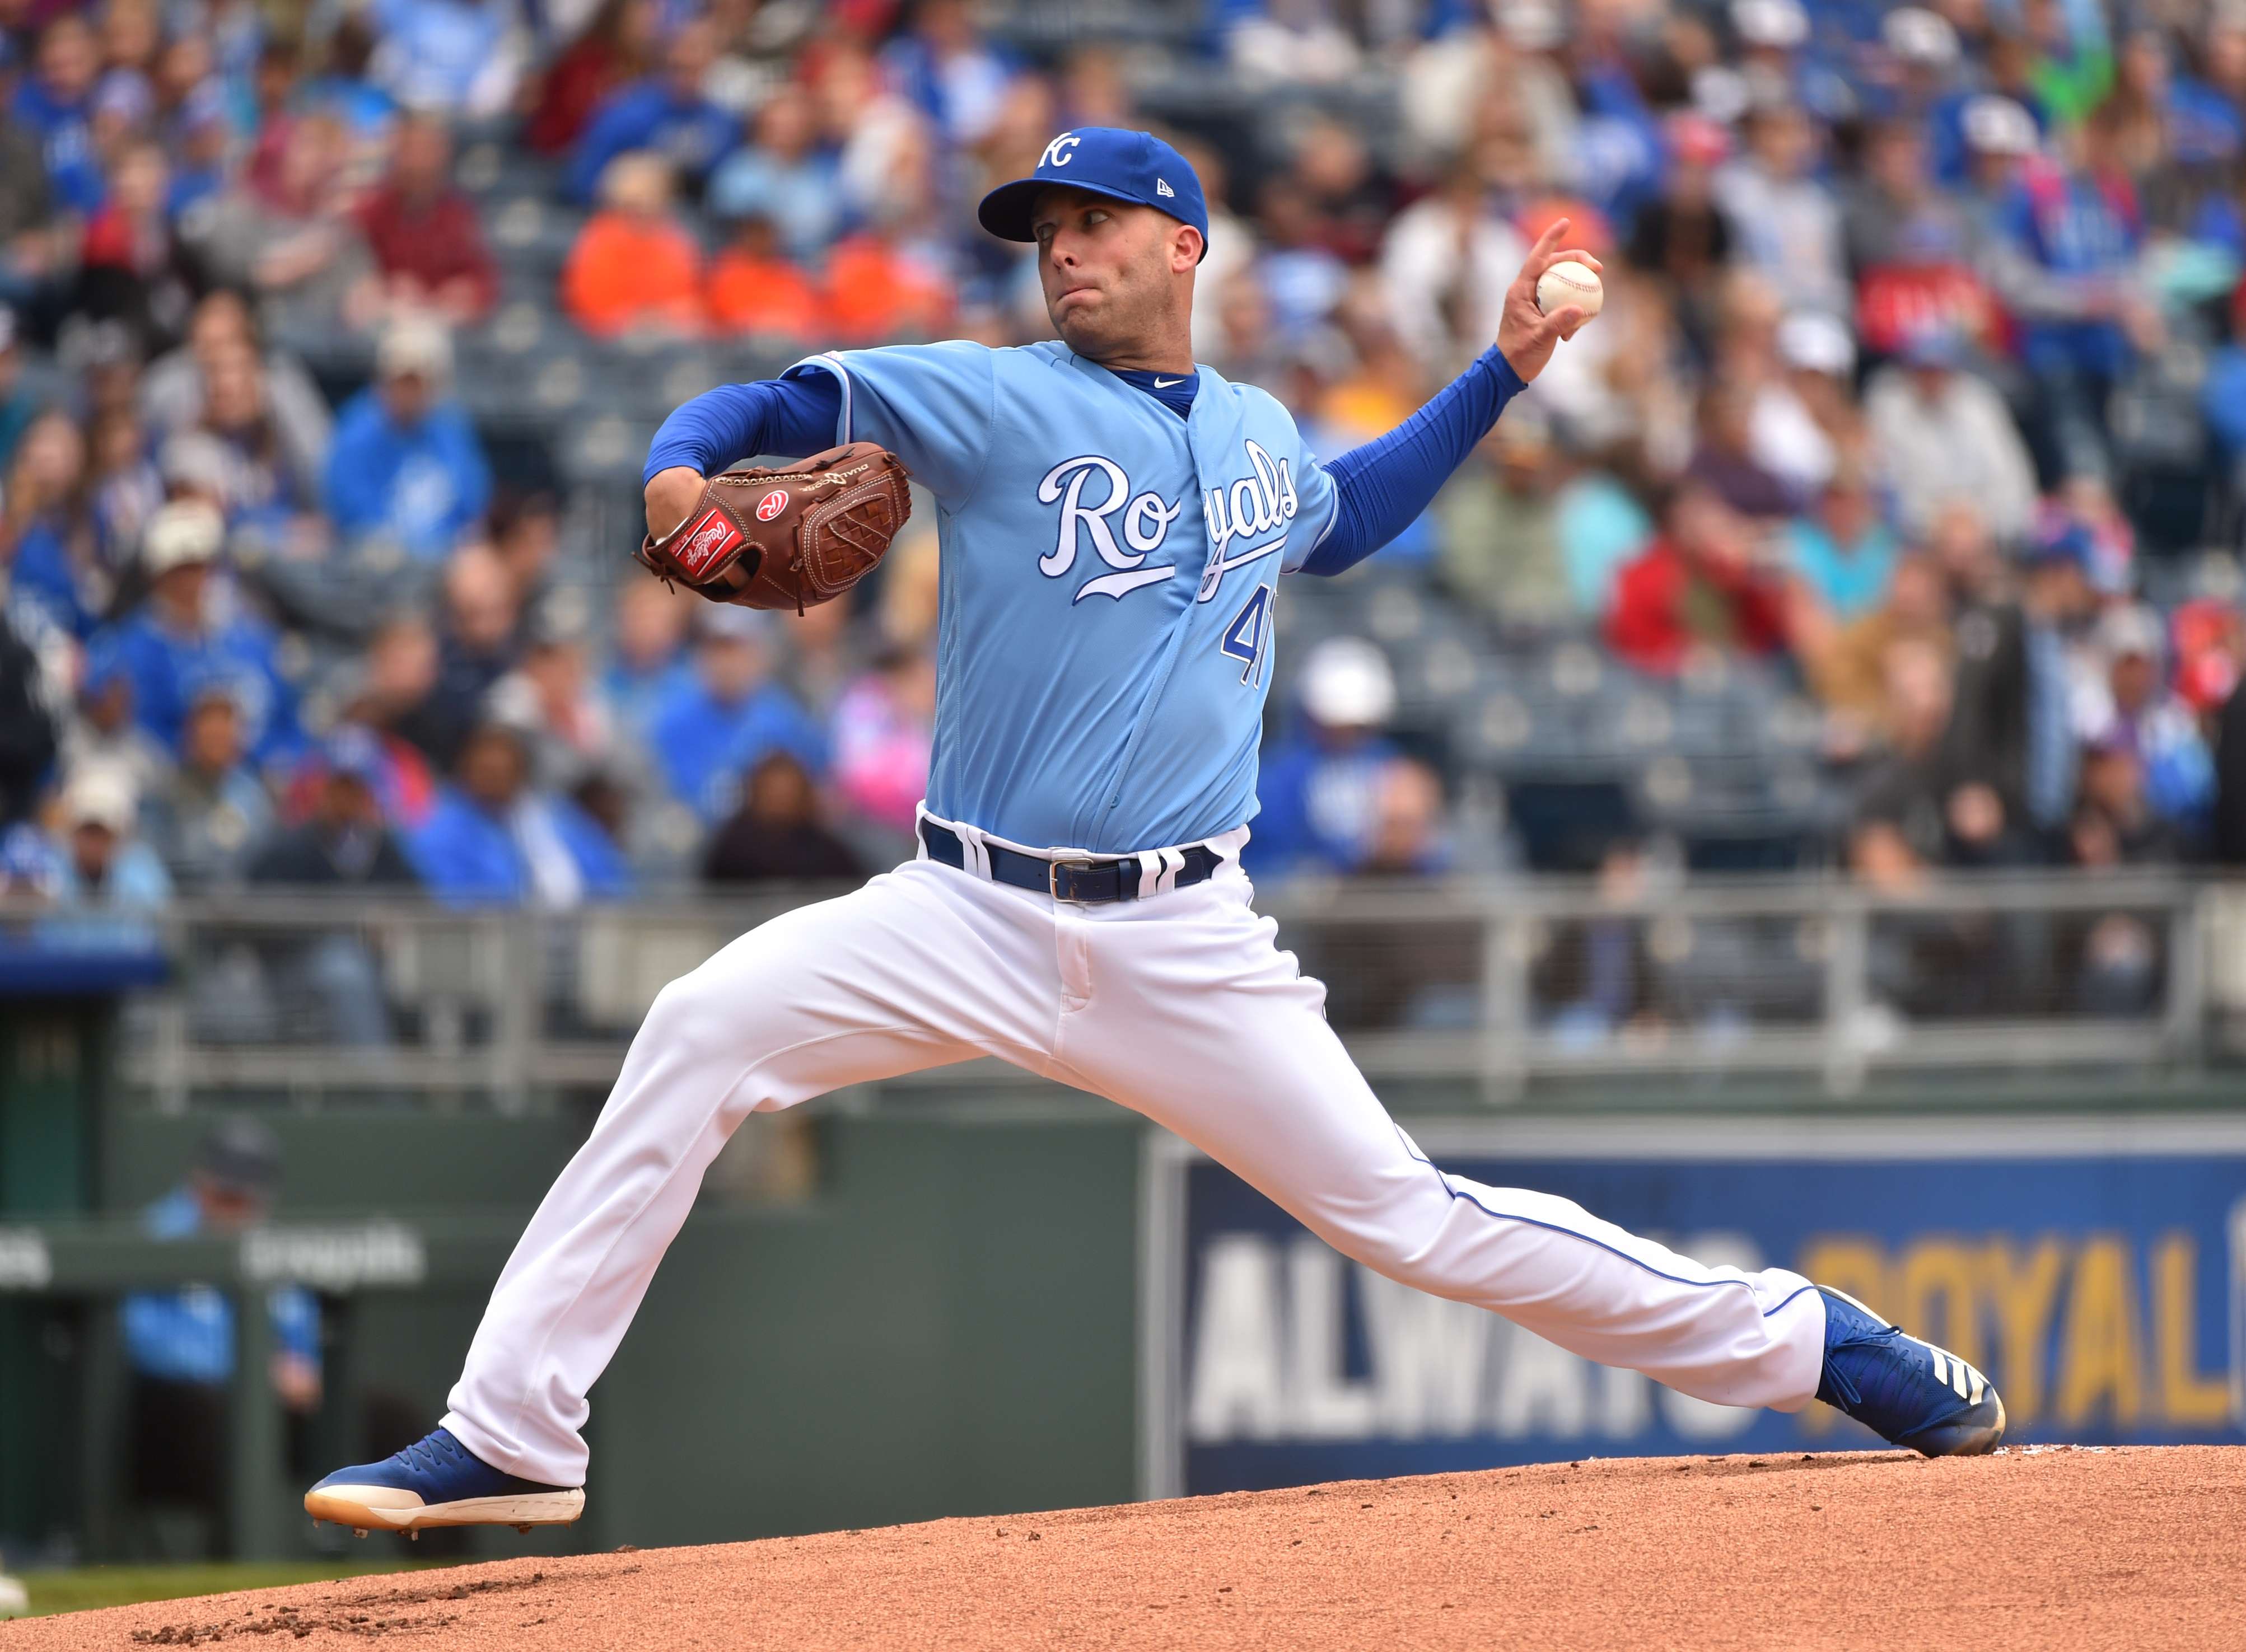 Starting pitcher Danny Duffy #41 of the Kansas City Royals throws in the first inning against the Tampa Bay Rays at Kauffman Stadium on May 02, 2019 in Kansas City, Missouri.